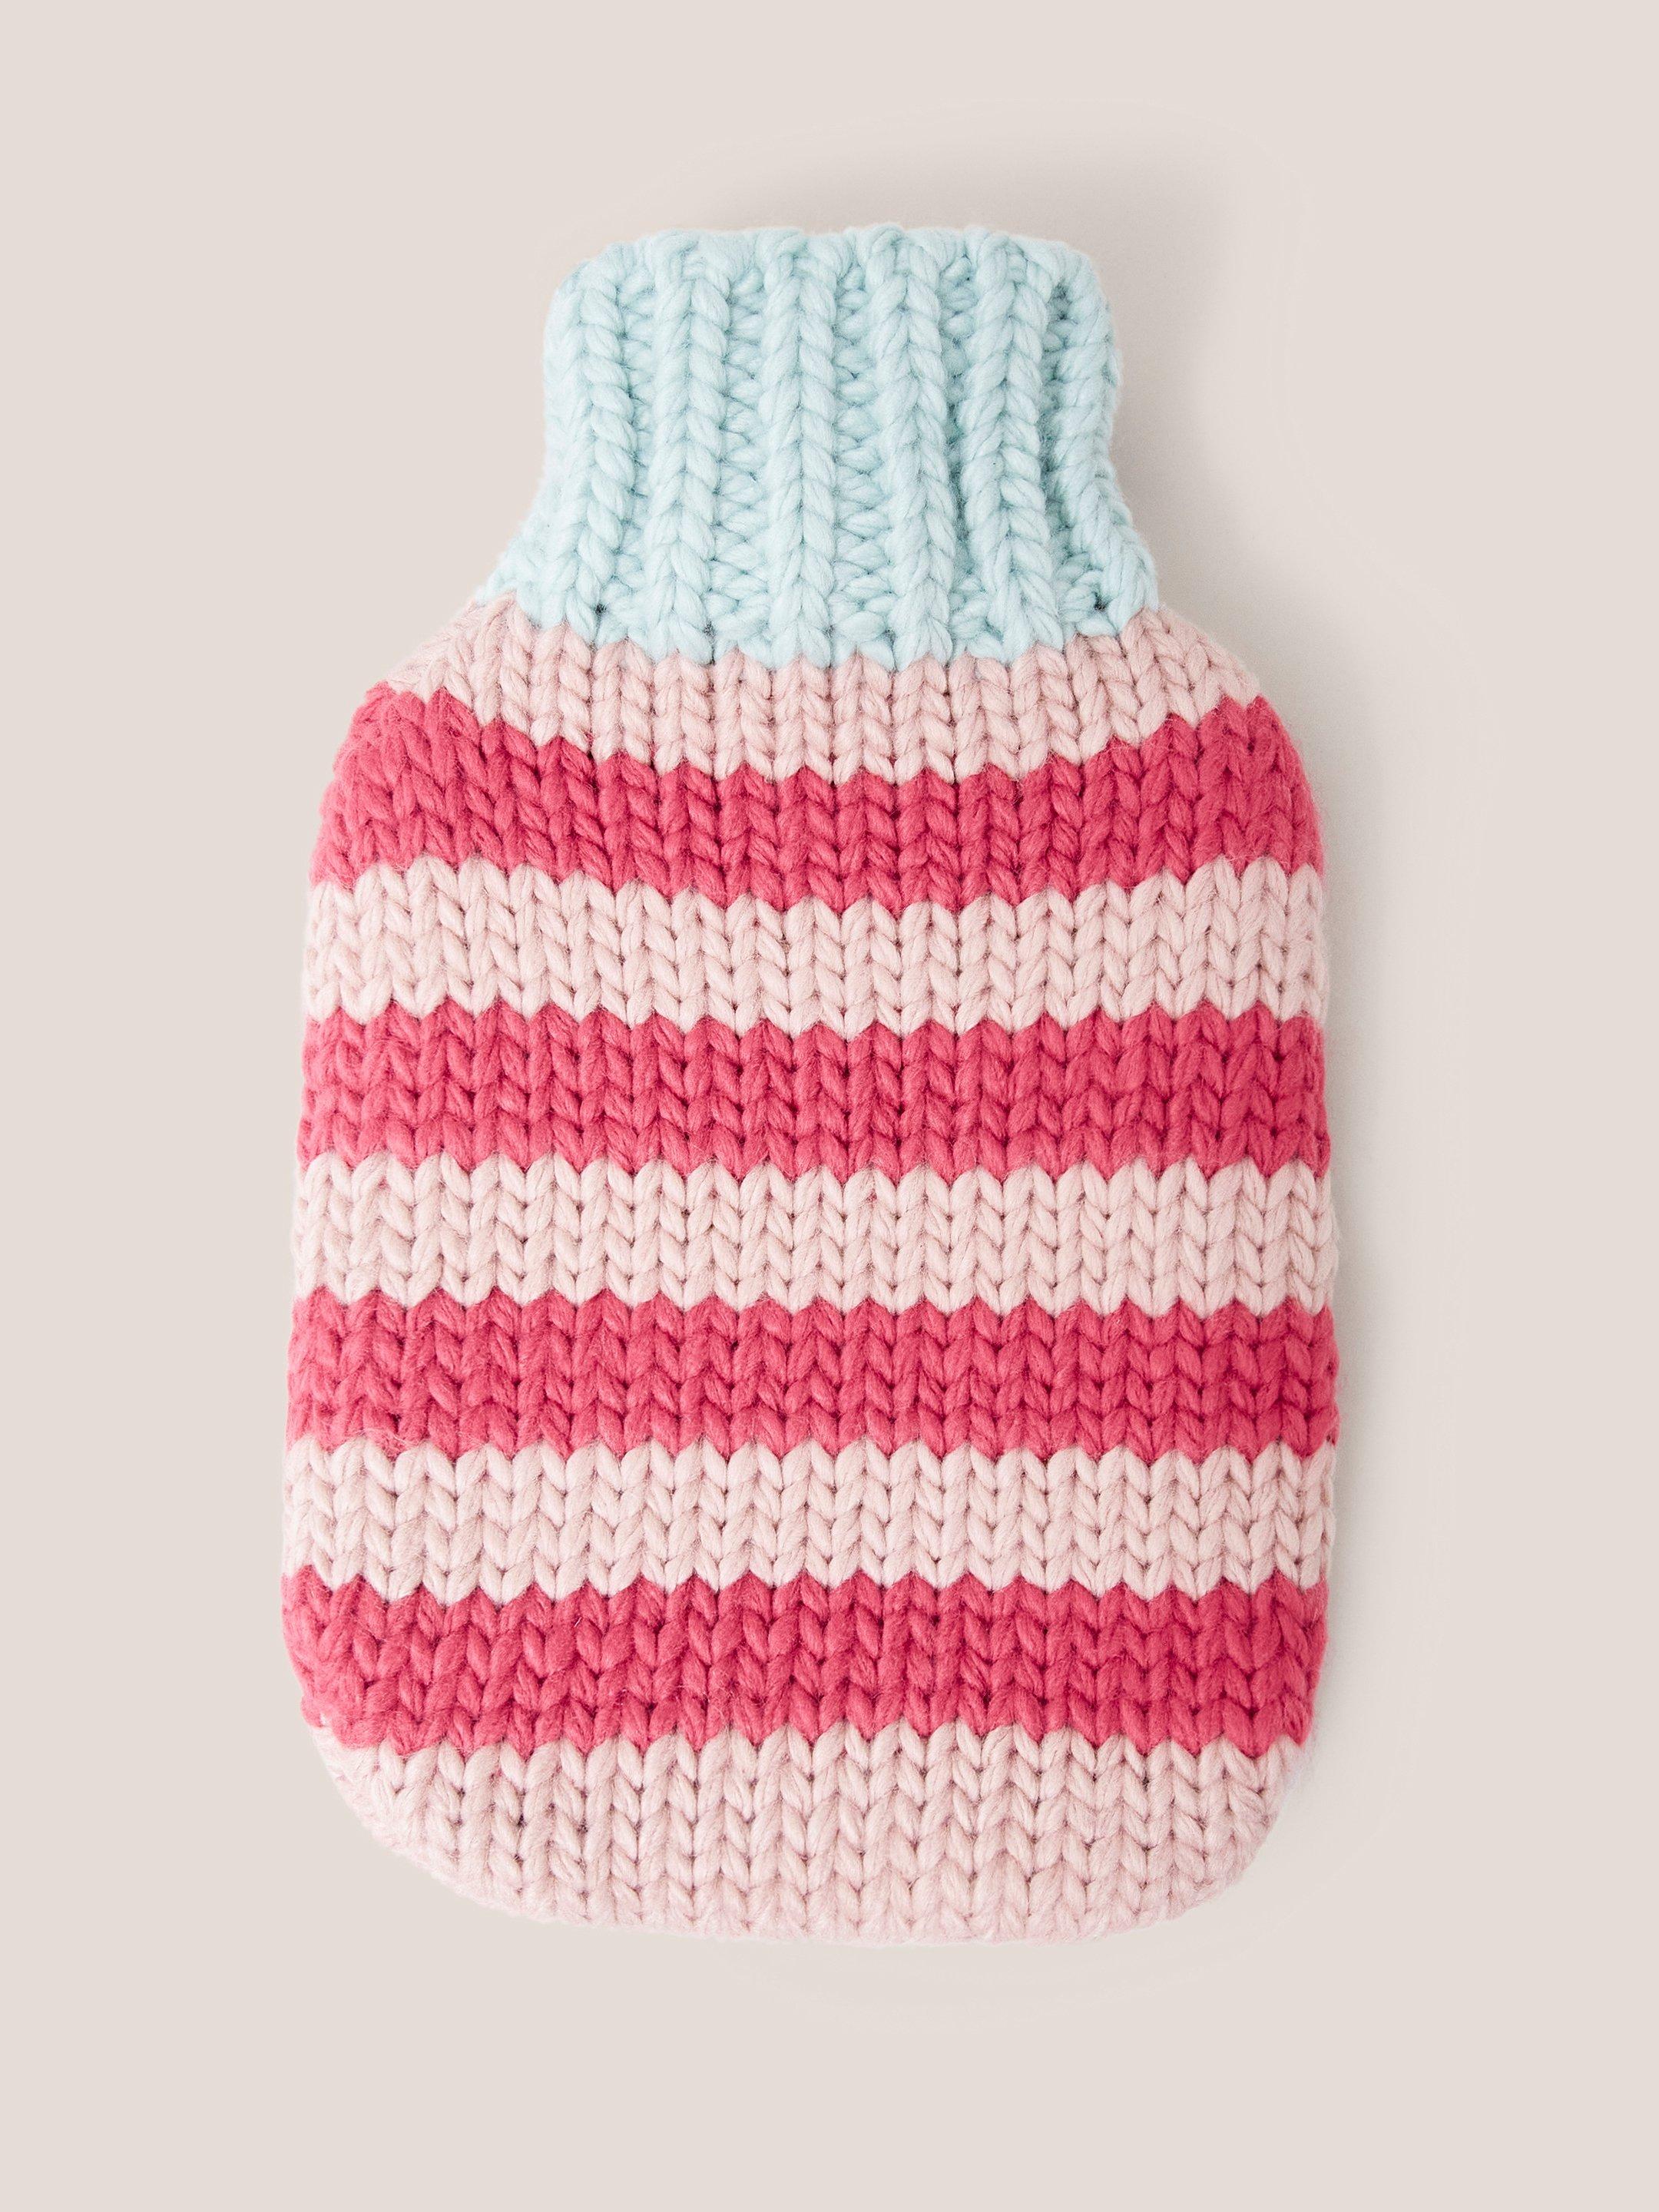 Knitted Hot Water Bottle